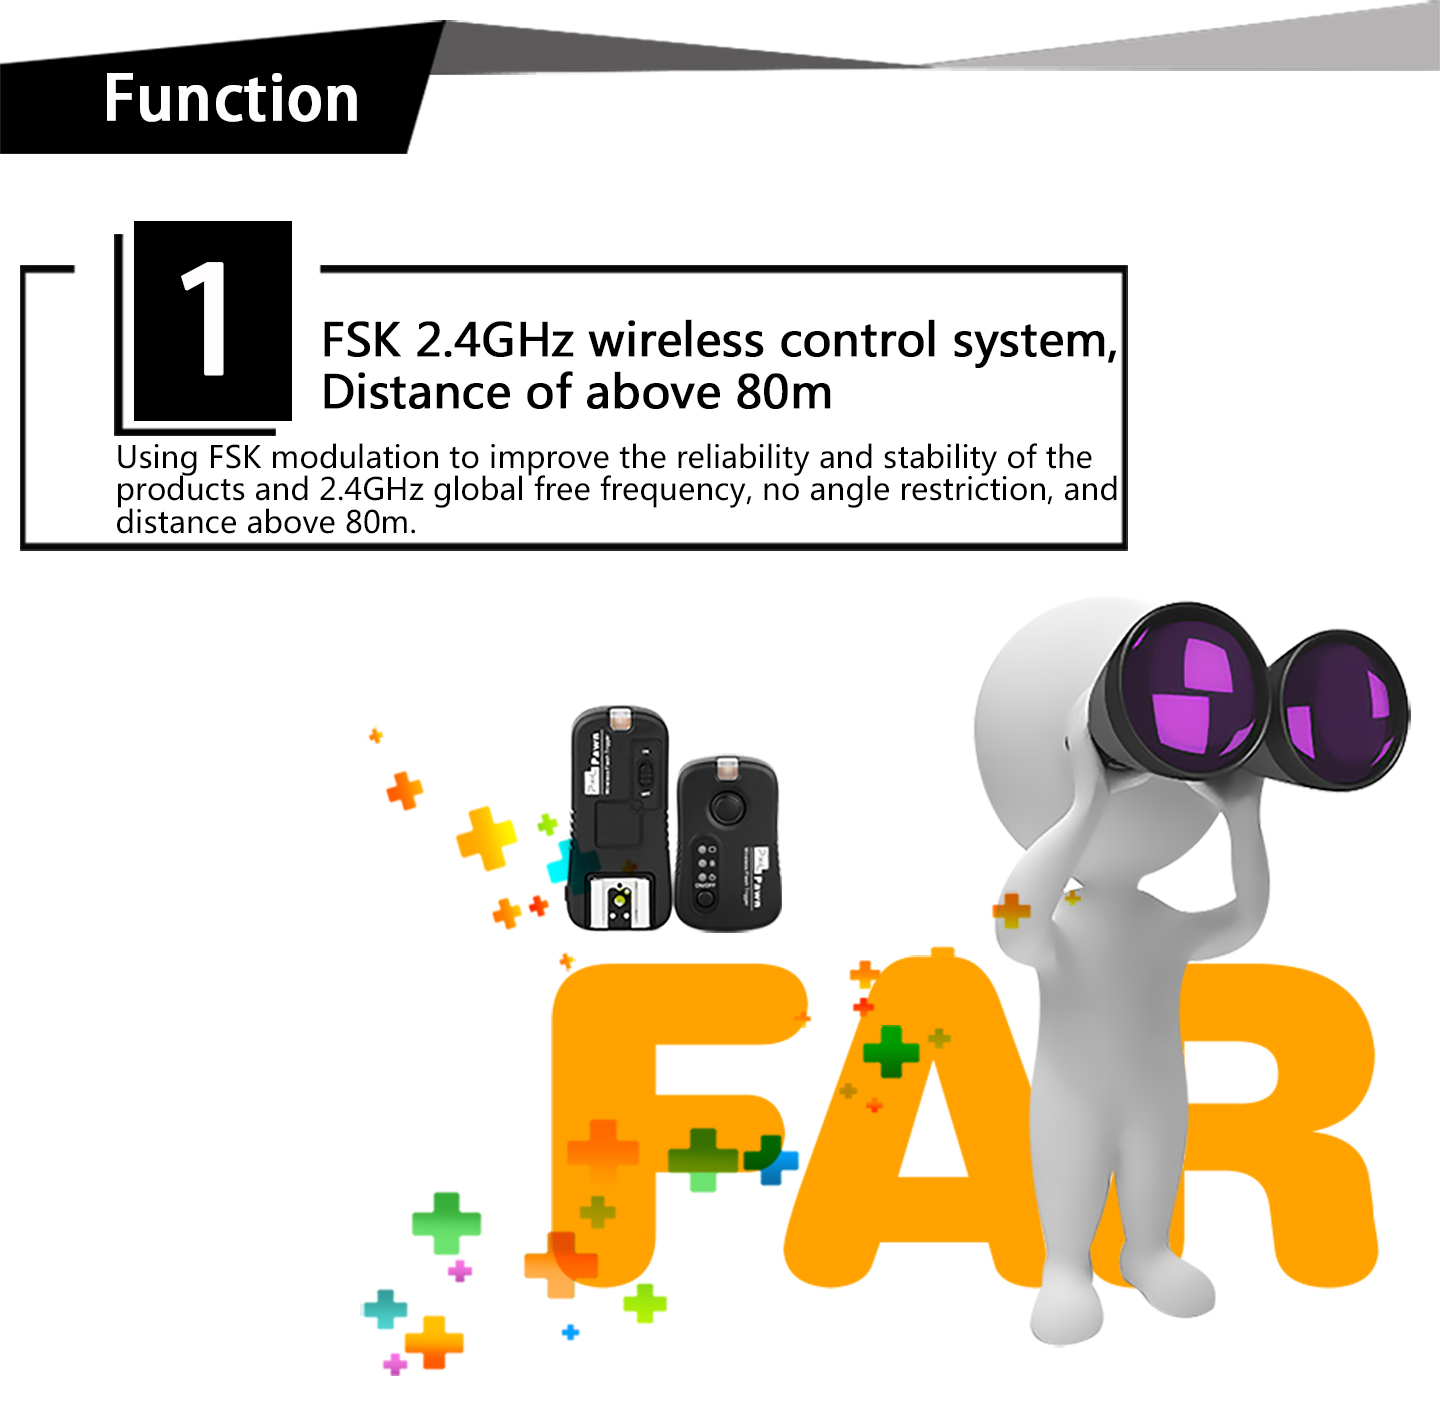 FSK 2.4Ghz wireless control system, Distance of above 80m